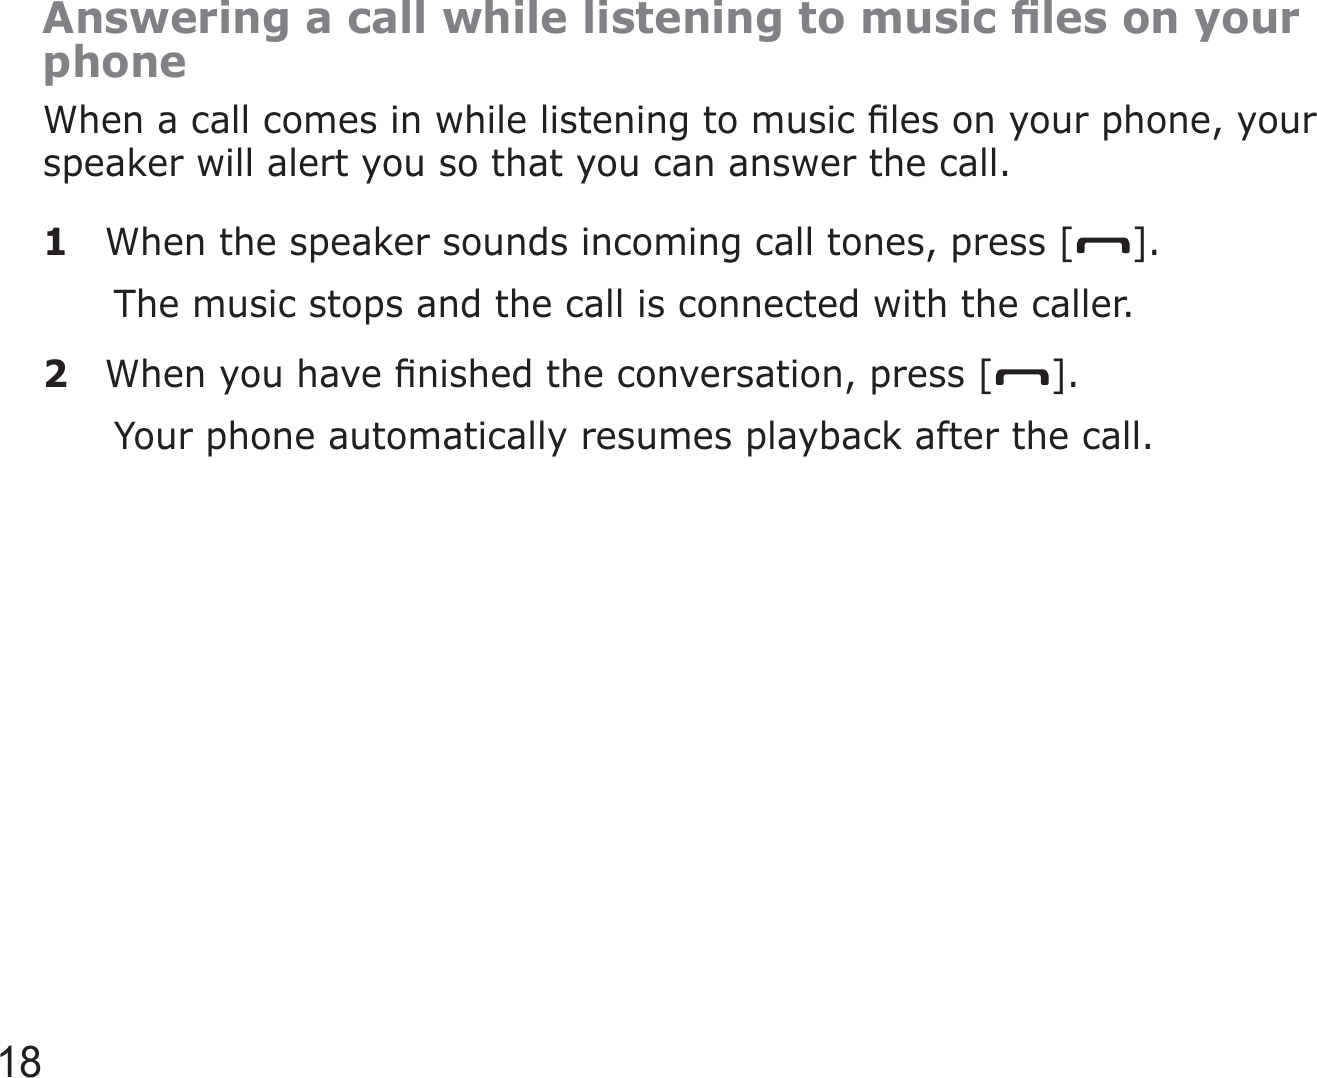 18Answering a call while listening to music ﬁles on your phoneWhen a call comes in while listening to music ﬁles on your phone, your speaker will alert you so that you can answer the call.1  When the speaker sounds incoming call tones, press [ ].The music stops and the call is connected with the caller.2  When you have ﬁnished the conversation, press [ ].Your phone automatically resumes playback after the call.